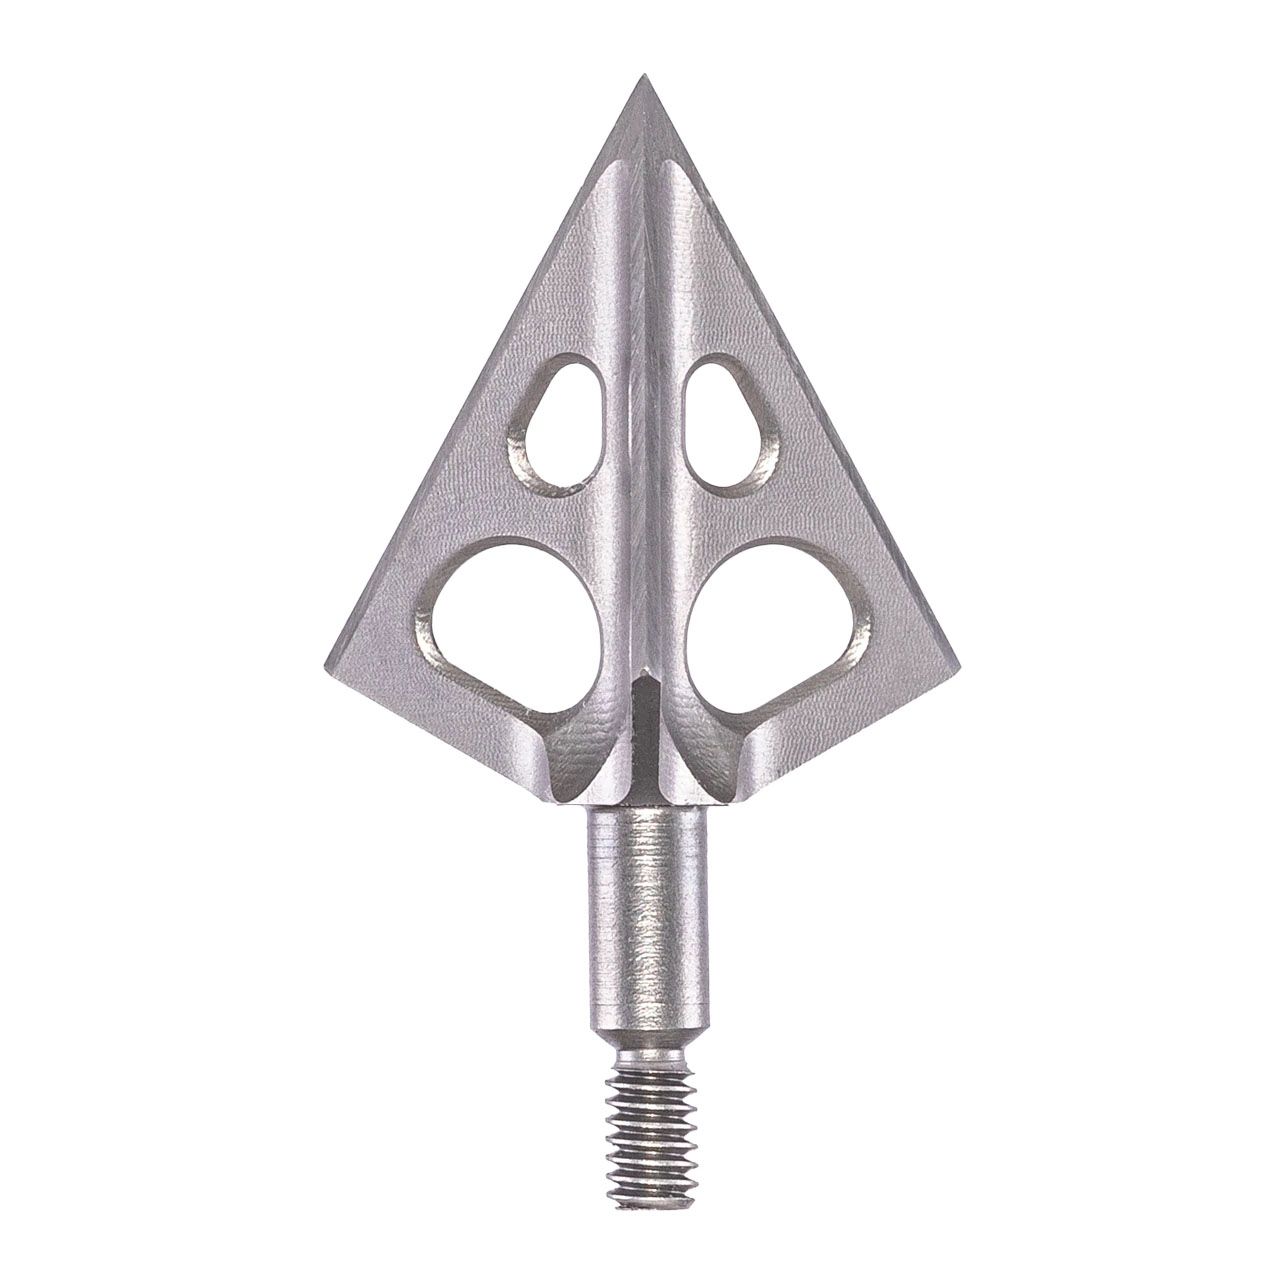 Muzzy Trocar 290 100 Grain Broadhead 3-Blade Hunting Tip 3 Pieces for sale online 